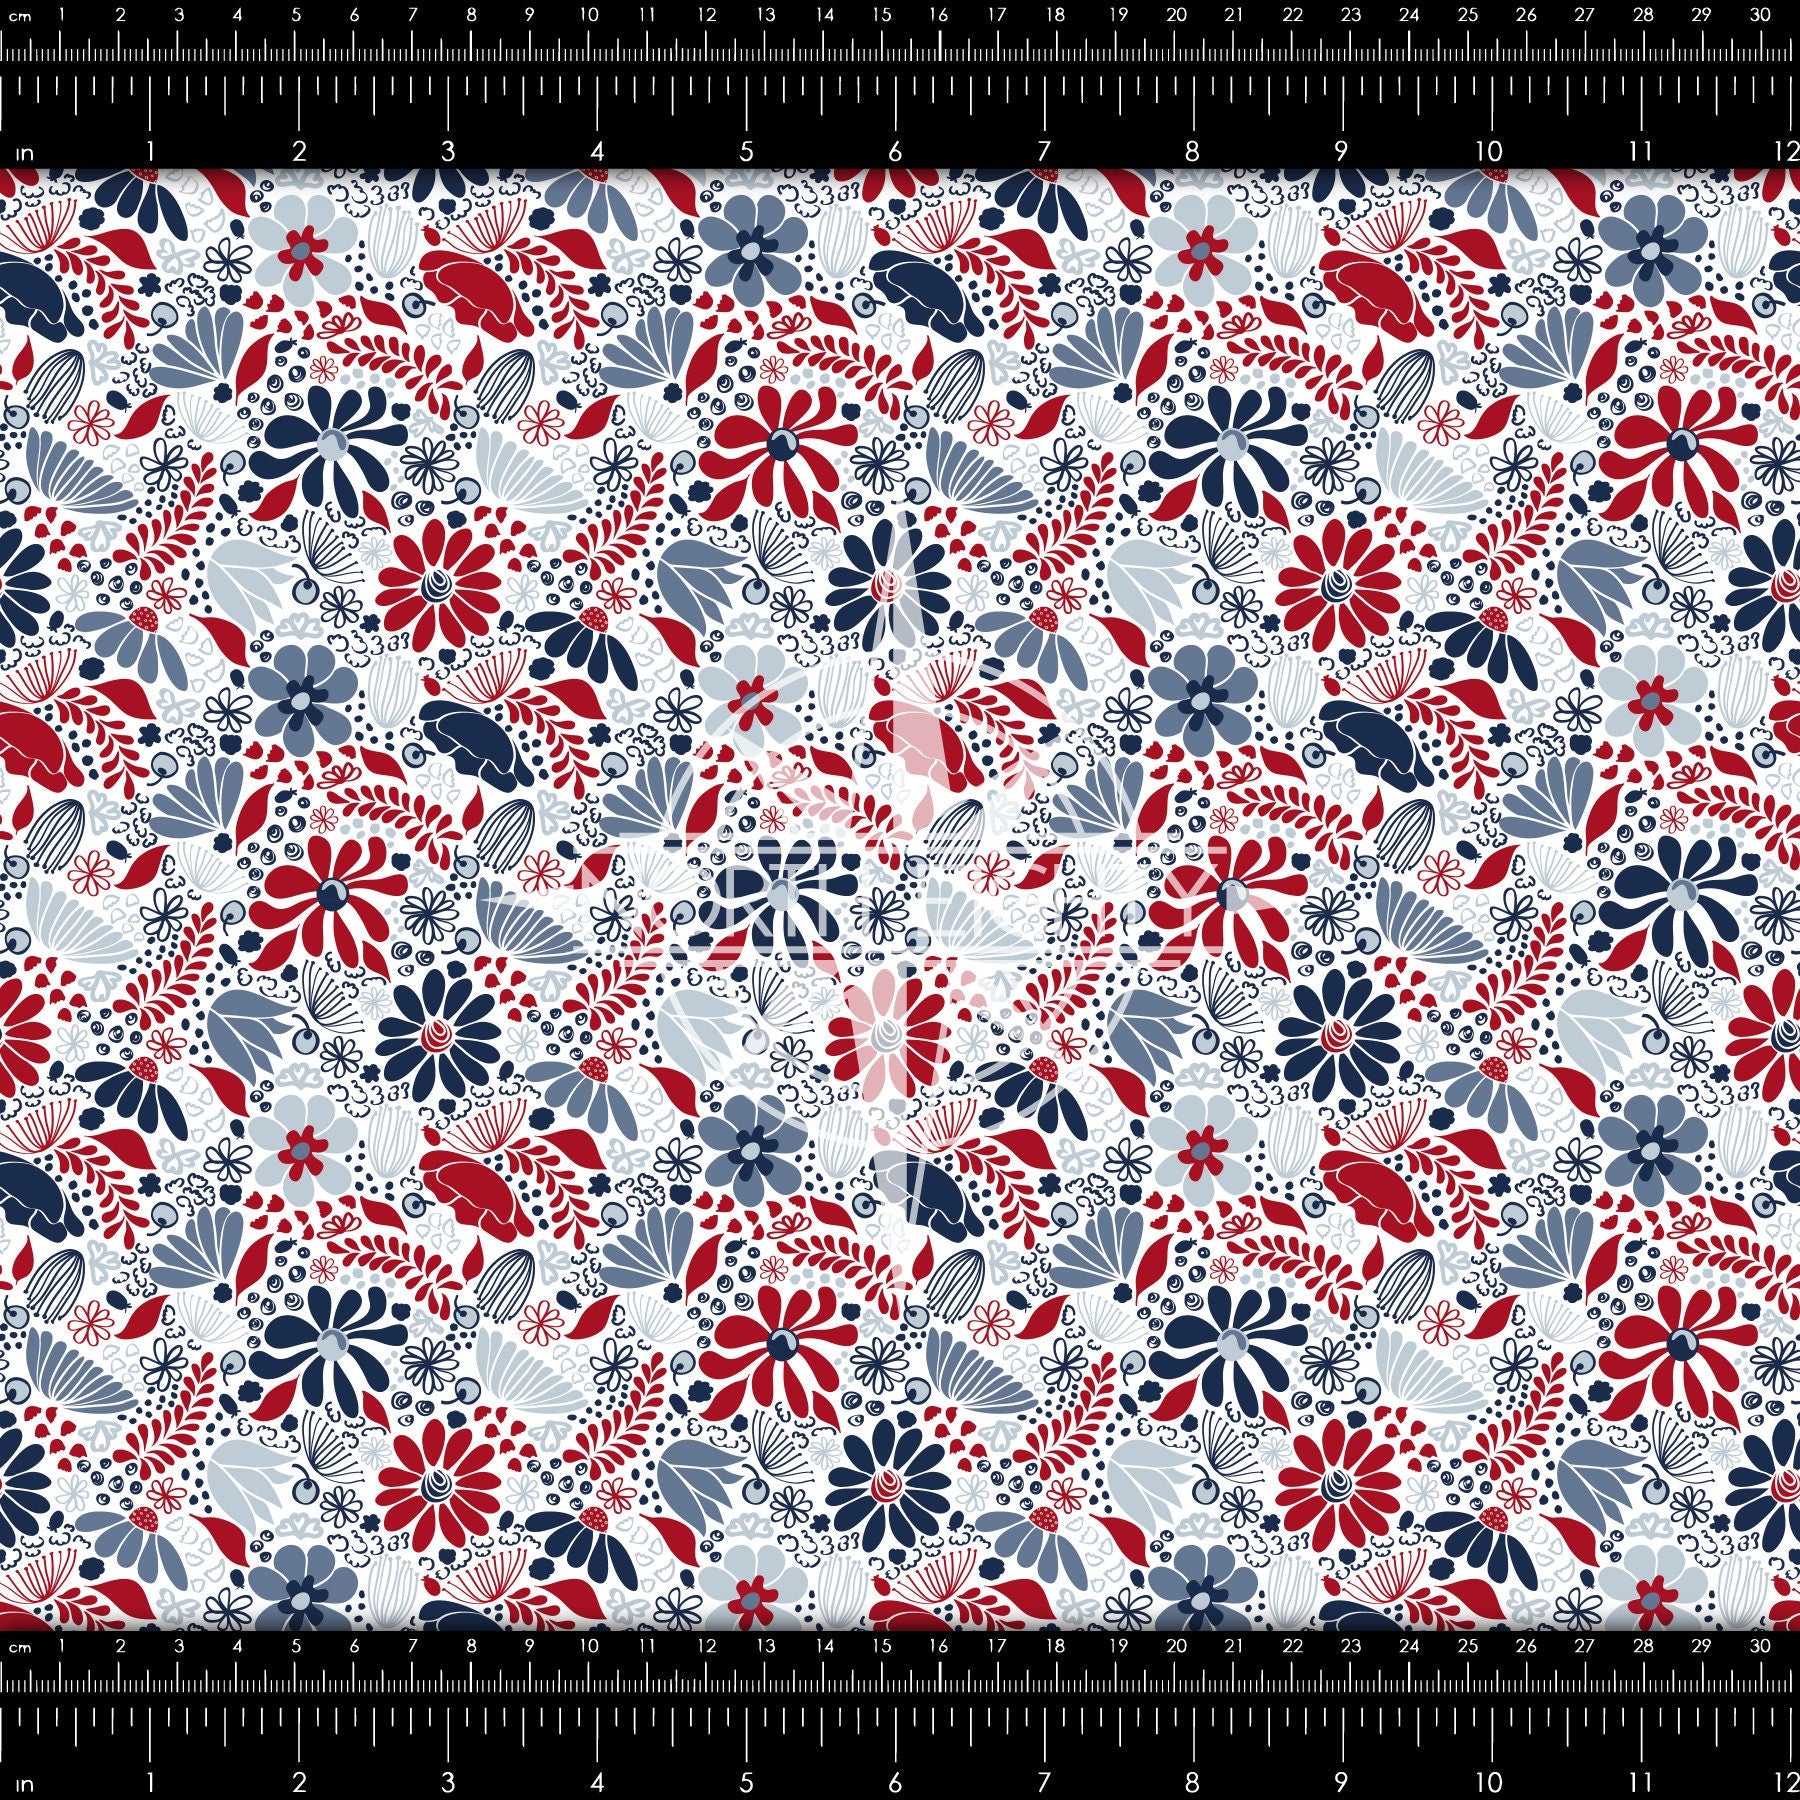 Patriotic Printed Vinyl - Floral Heat Transfer Vinyl - htv Sheet - 4th of July - Independence Day - Memorial Day